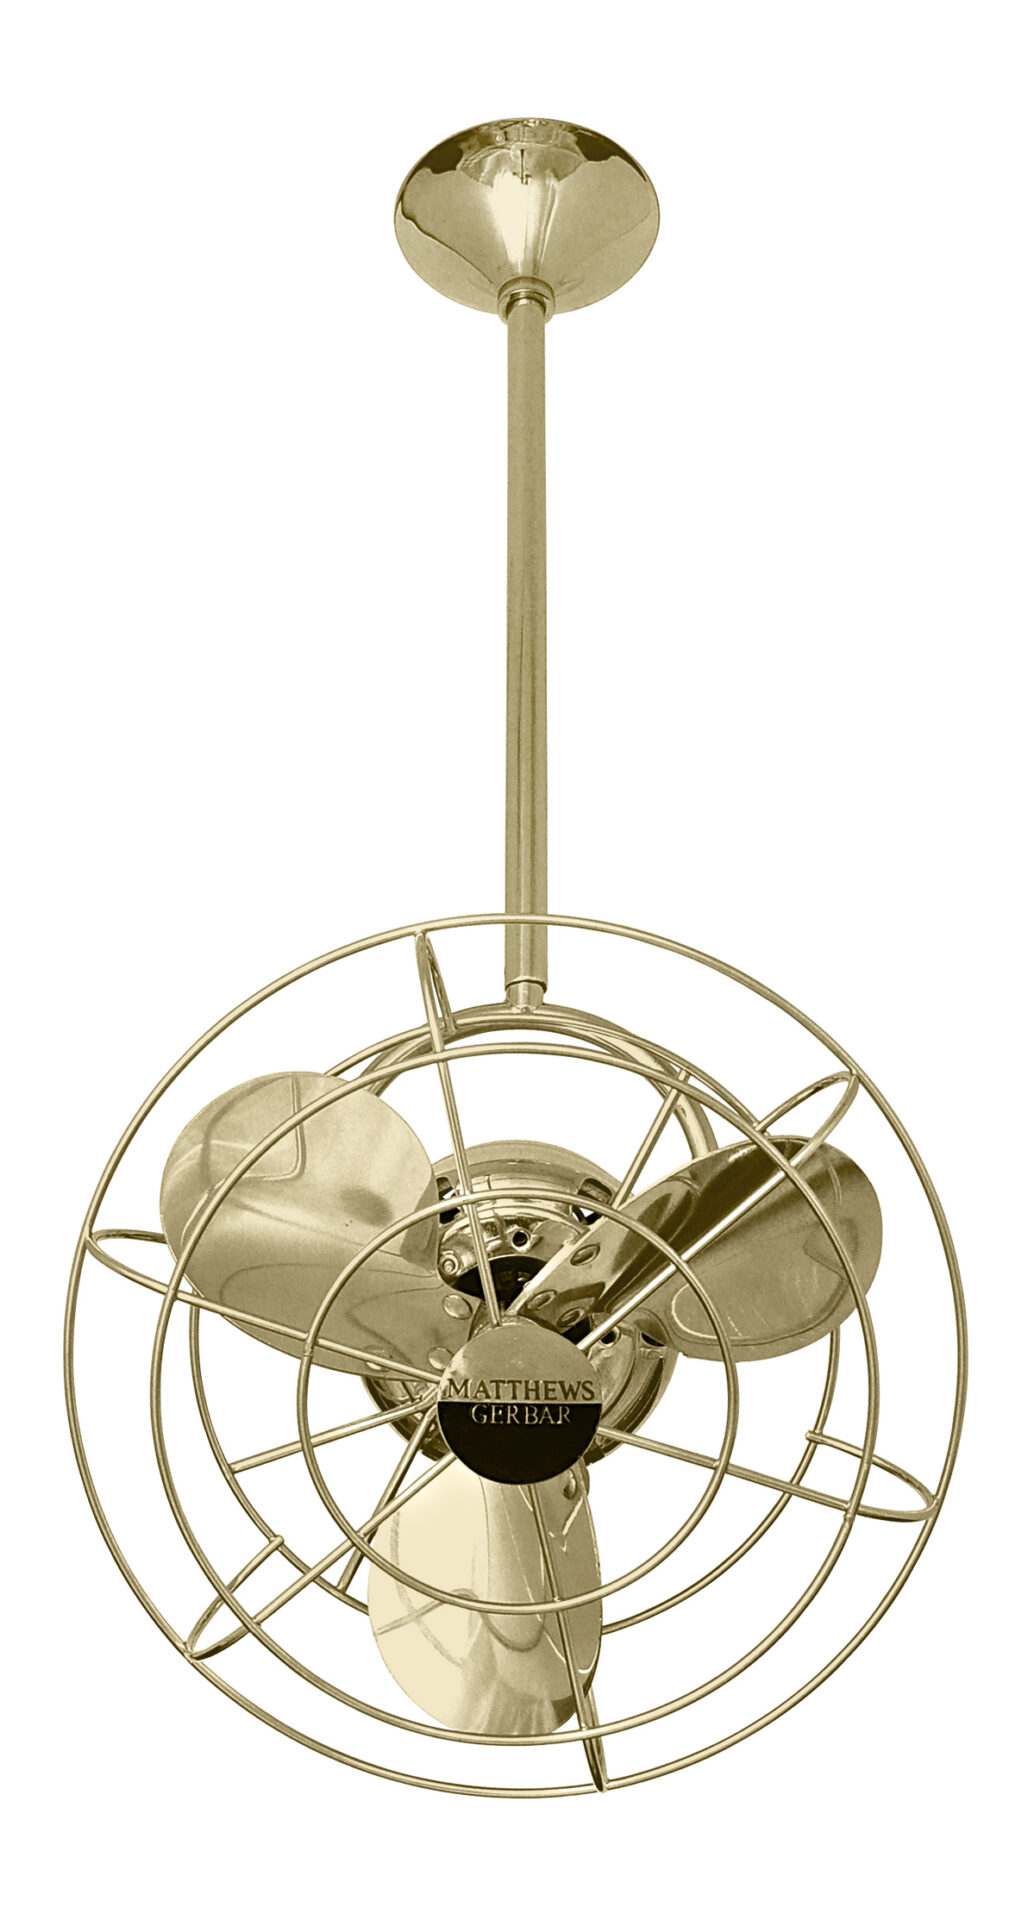 Bianca Direcional ceiling fan in Polished Brass with metal blades and decorative cage made by Matthews Fan Company.